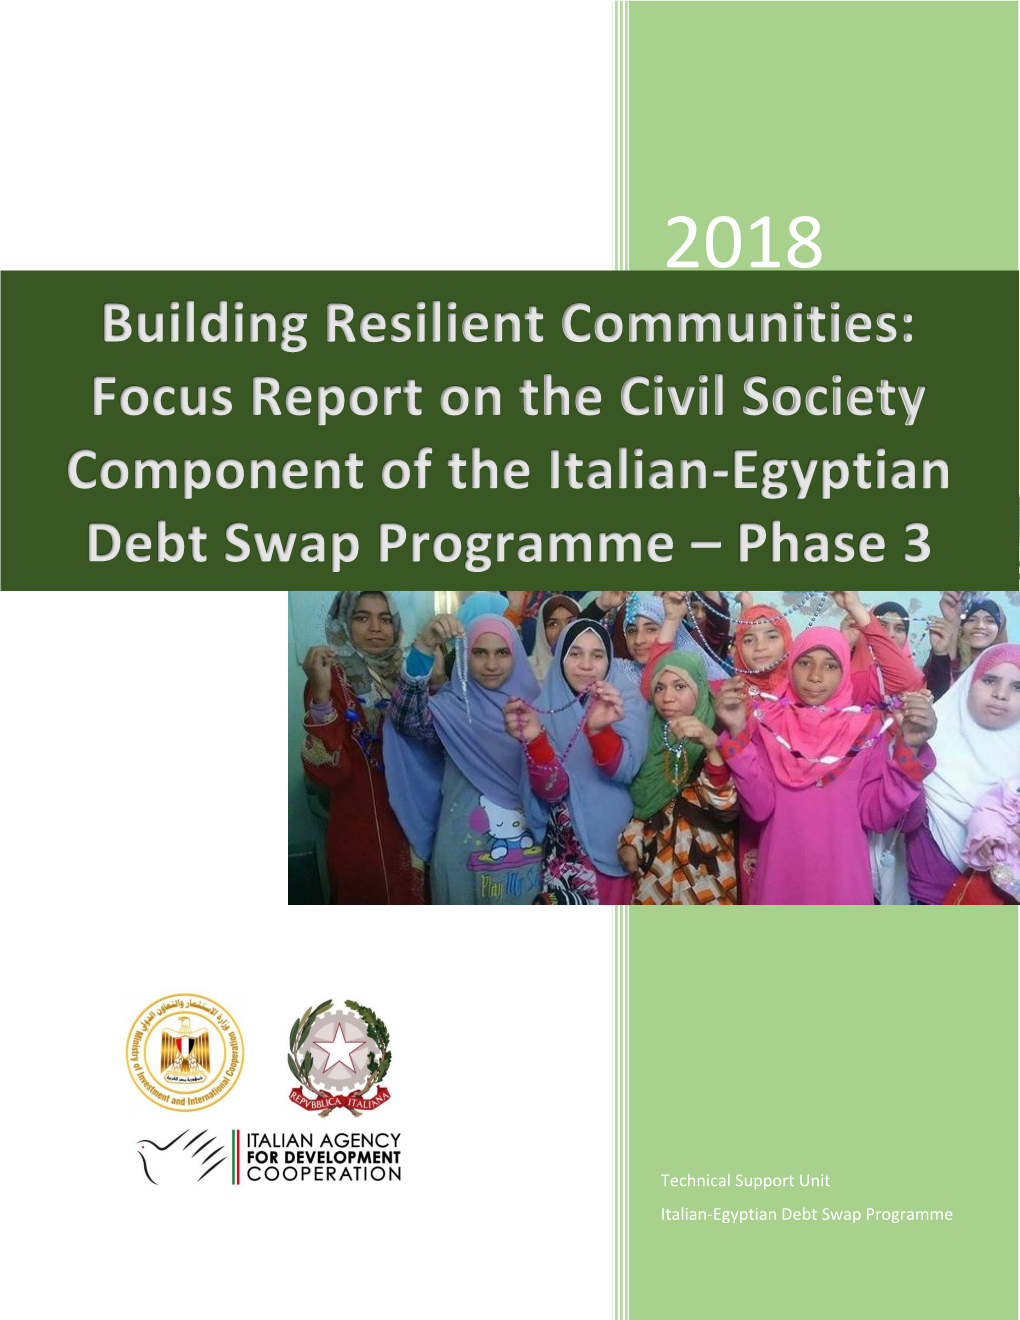 Focus Report on the Civil Society Component of the Italian-Egyptian Debt Swap Programme – Phase 3